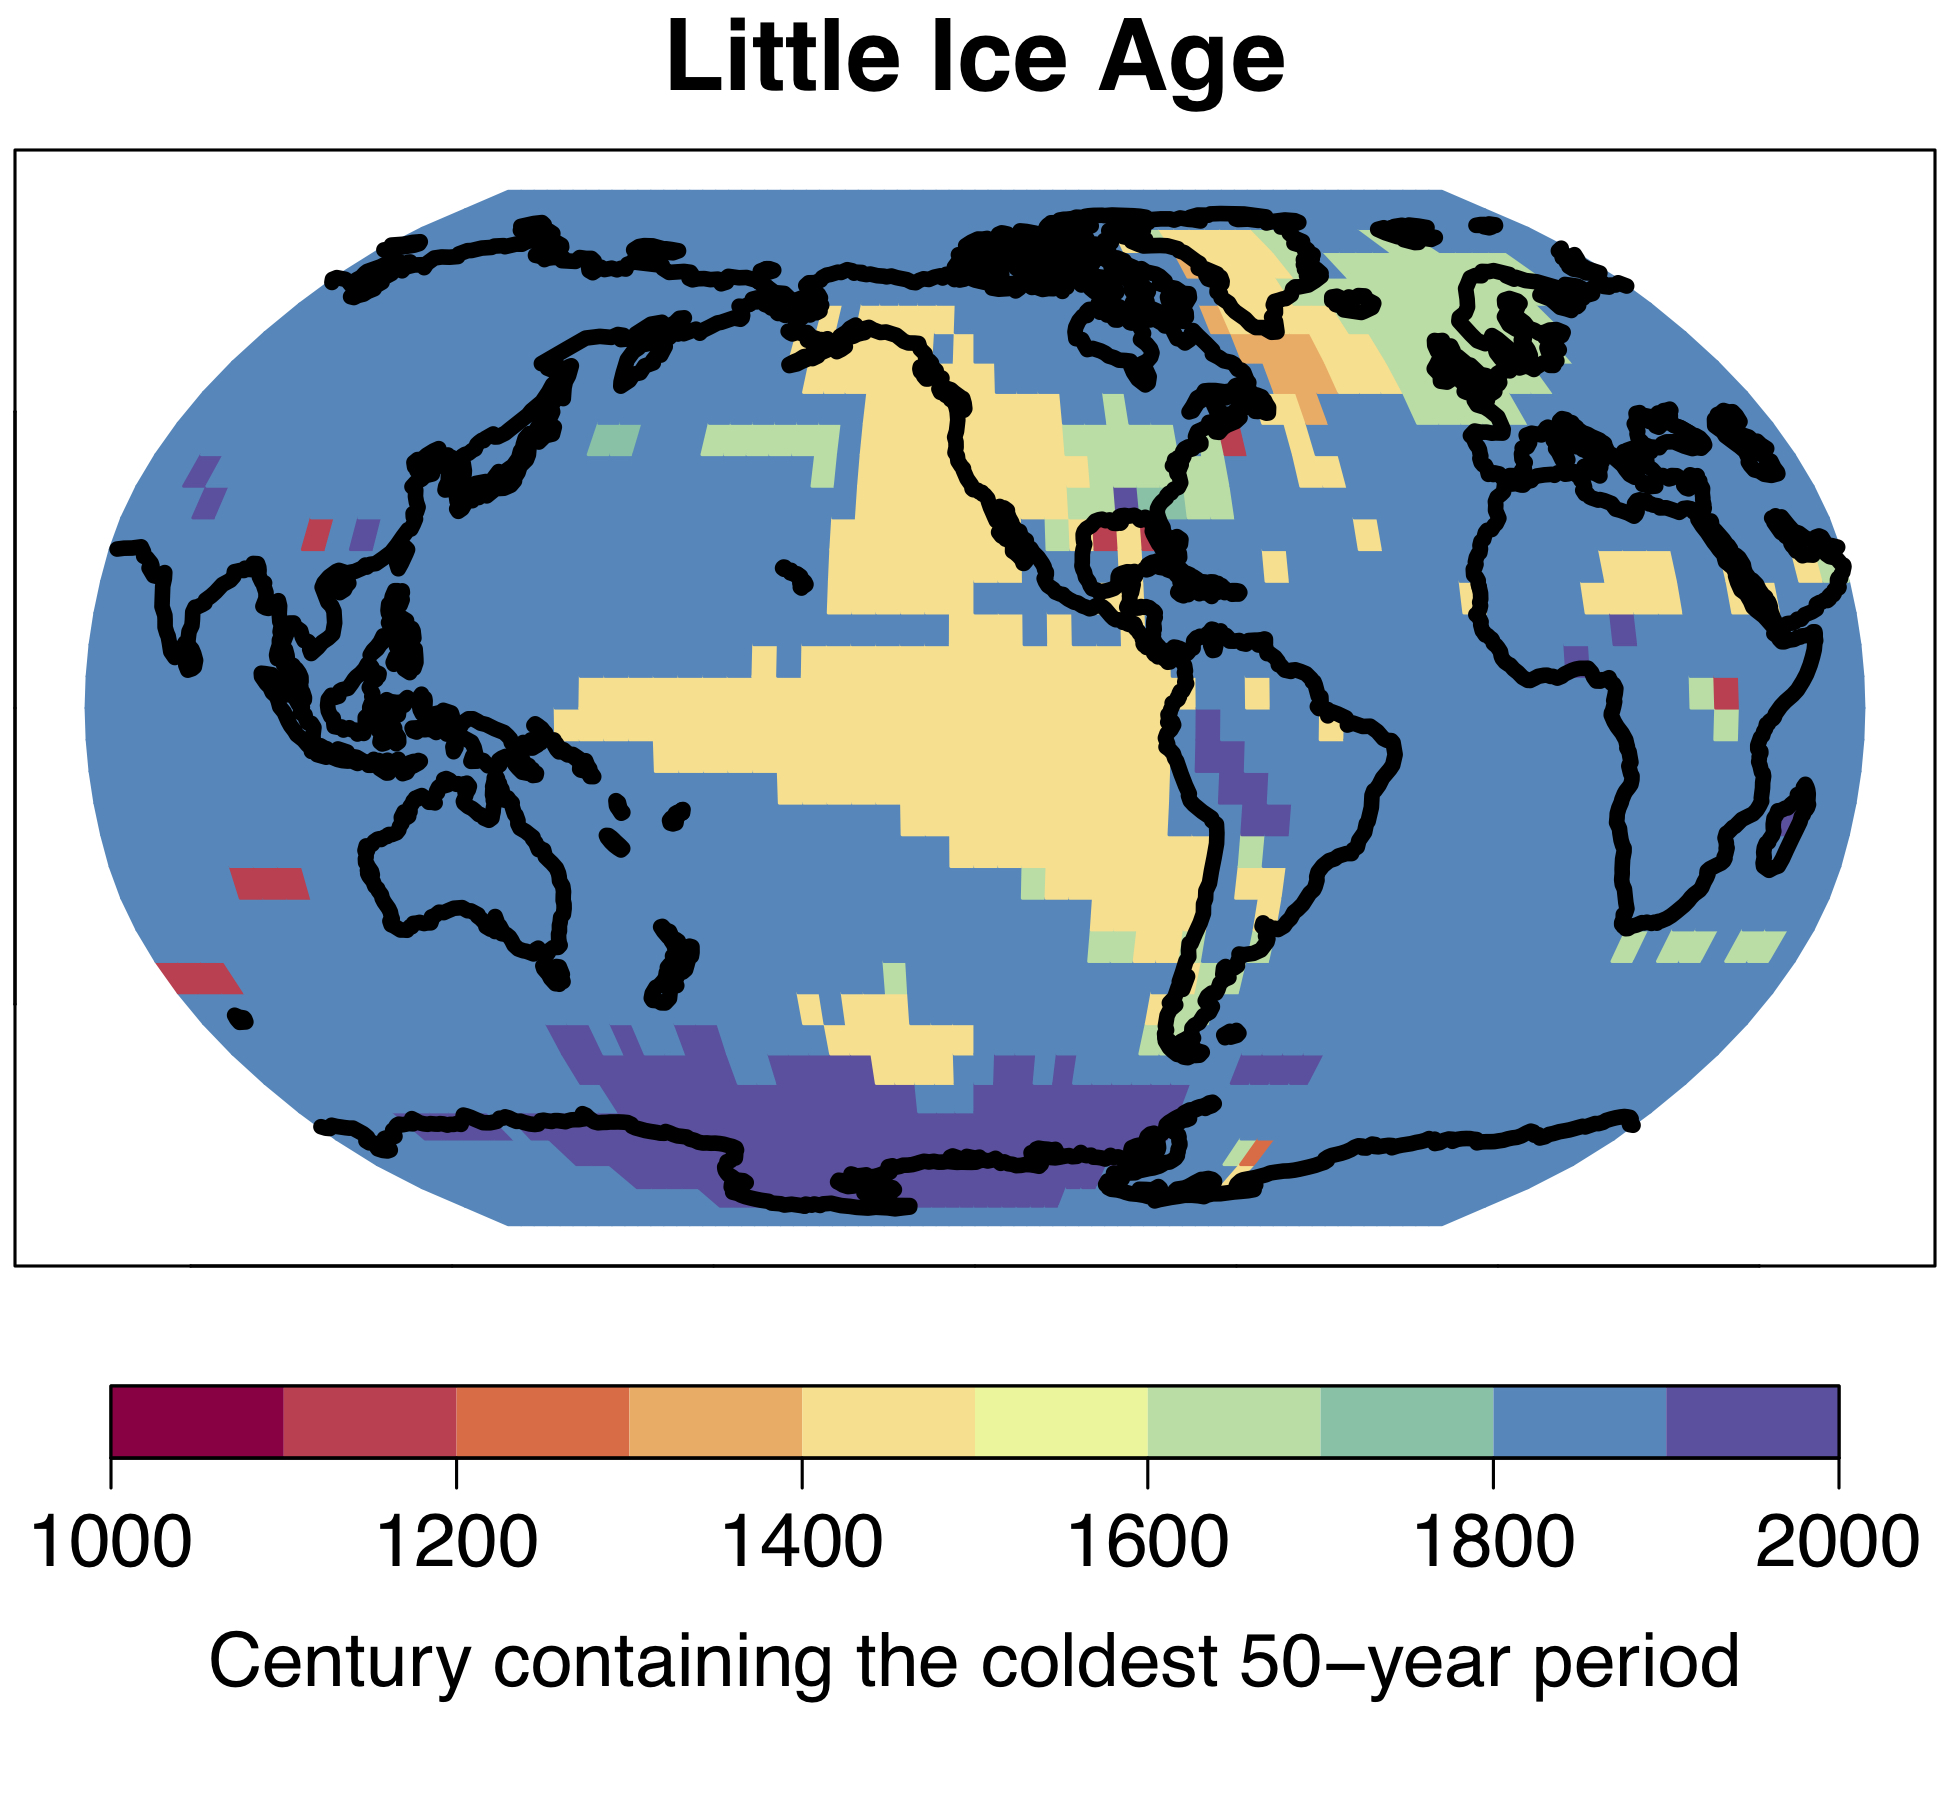 The cold period which became known as the "Little Ice Age" in Europe and North America was not a global phenomenon; the coldest 50-year period of the last millennium occurred at different times in different regions. © University of Bern